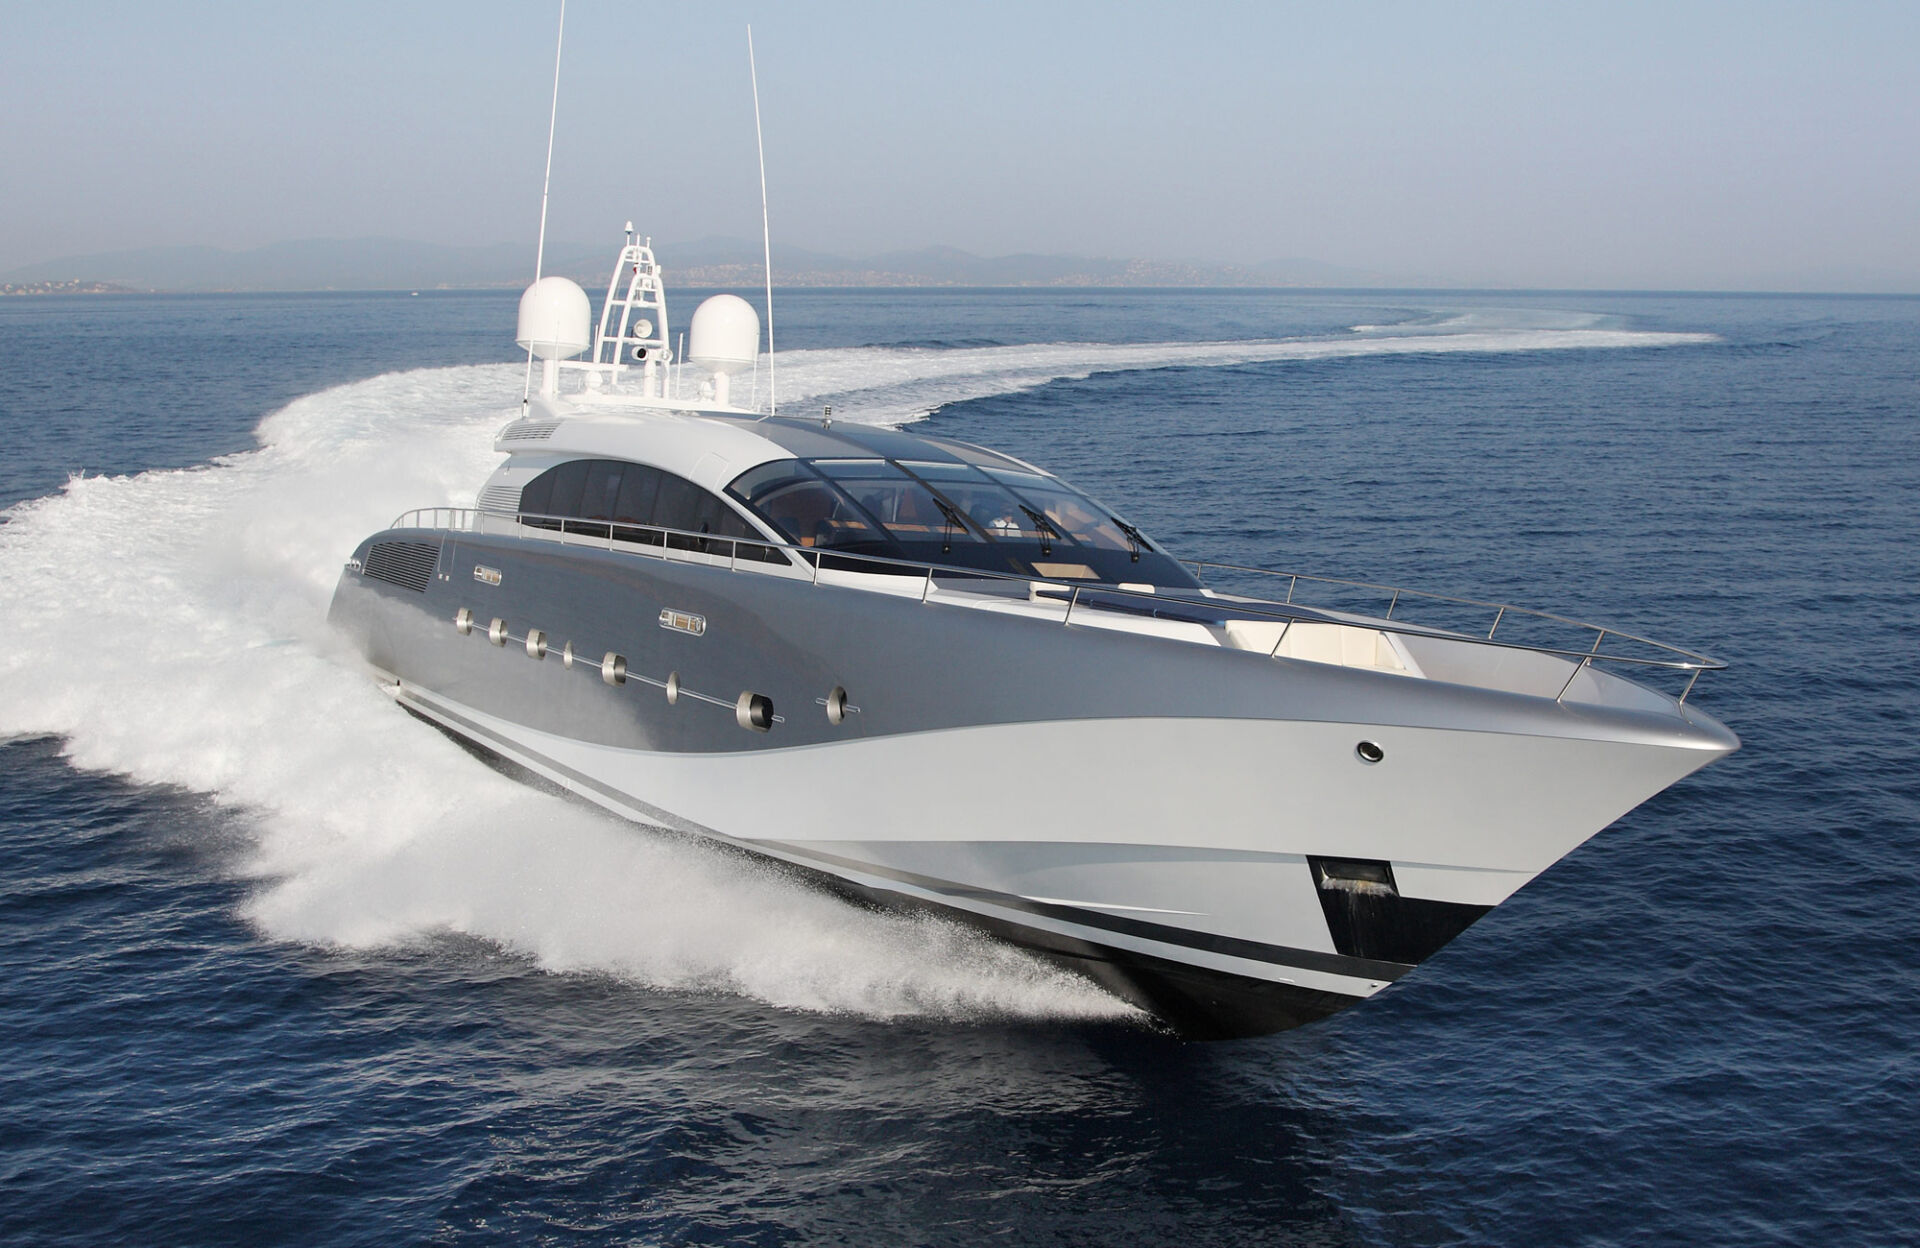 Motor yacht Shooting Star now for sale at Yachtzoo